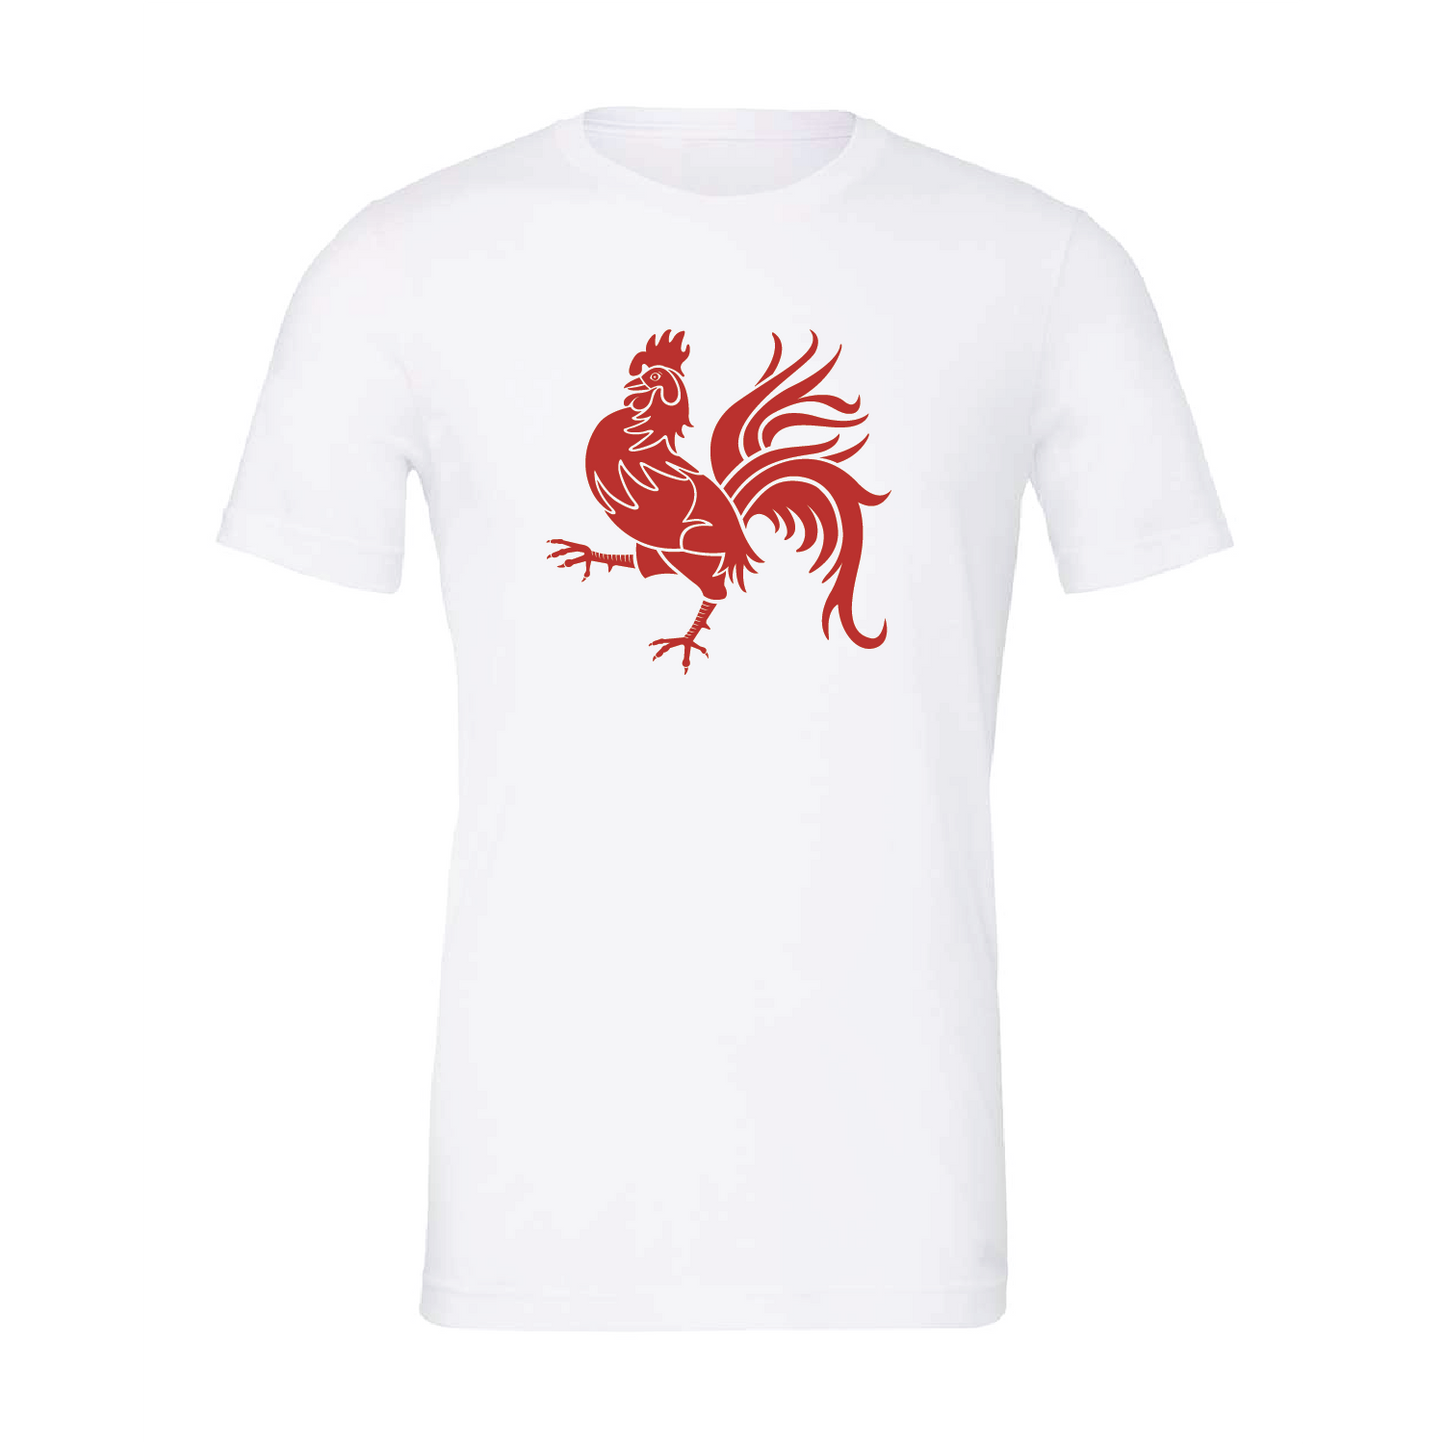 Brewery Vivant Rooster Unisex Jersey Tee